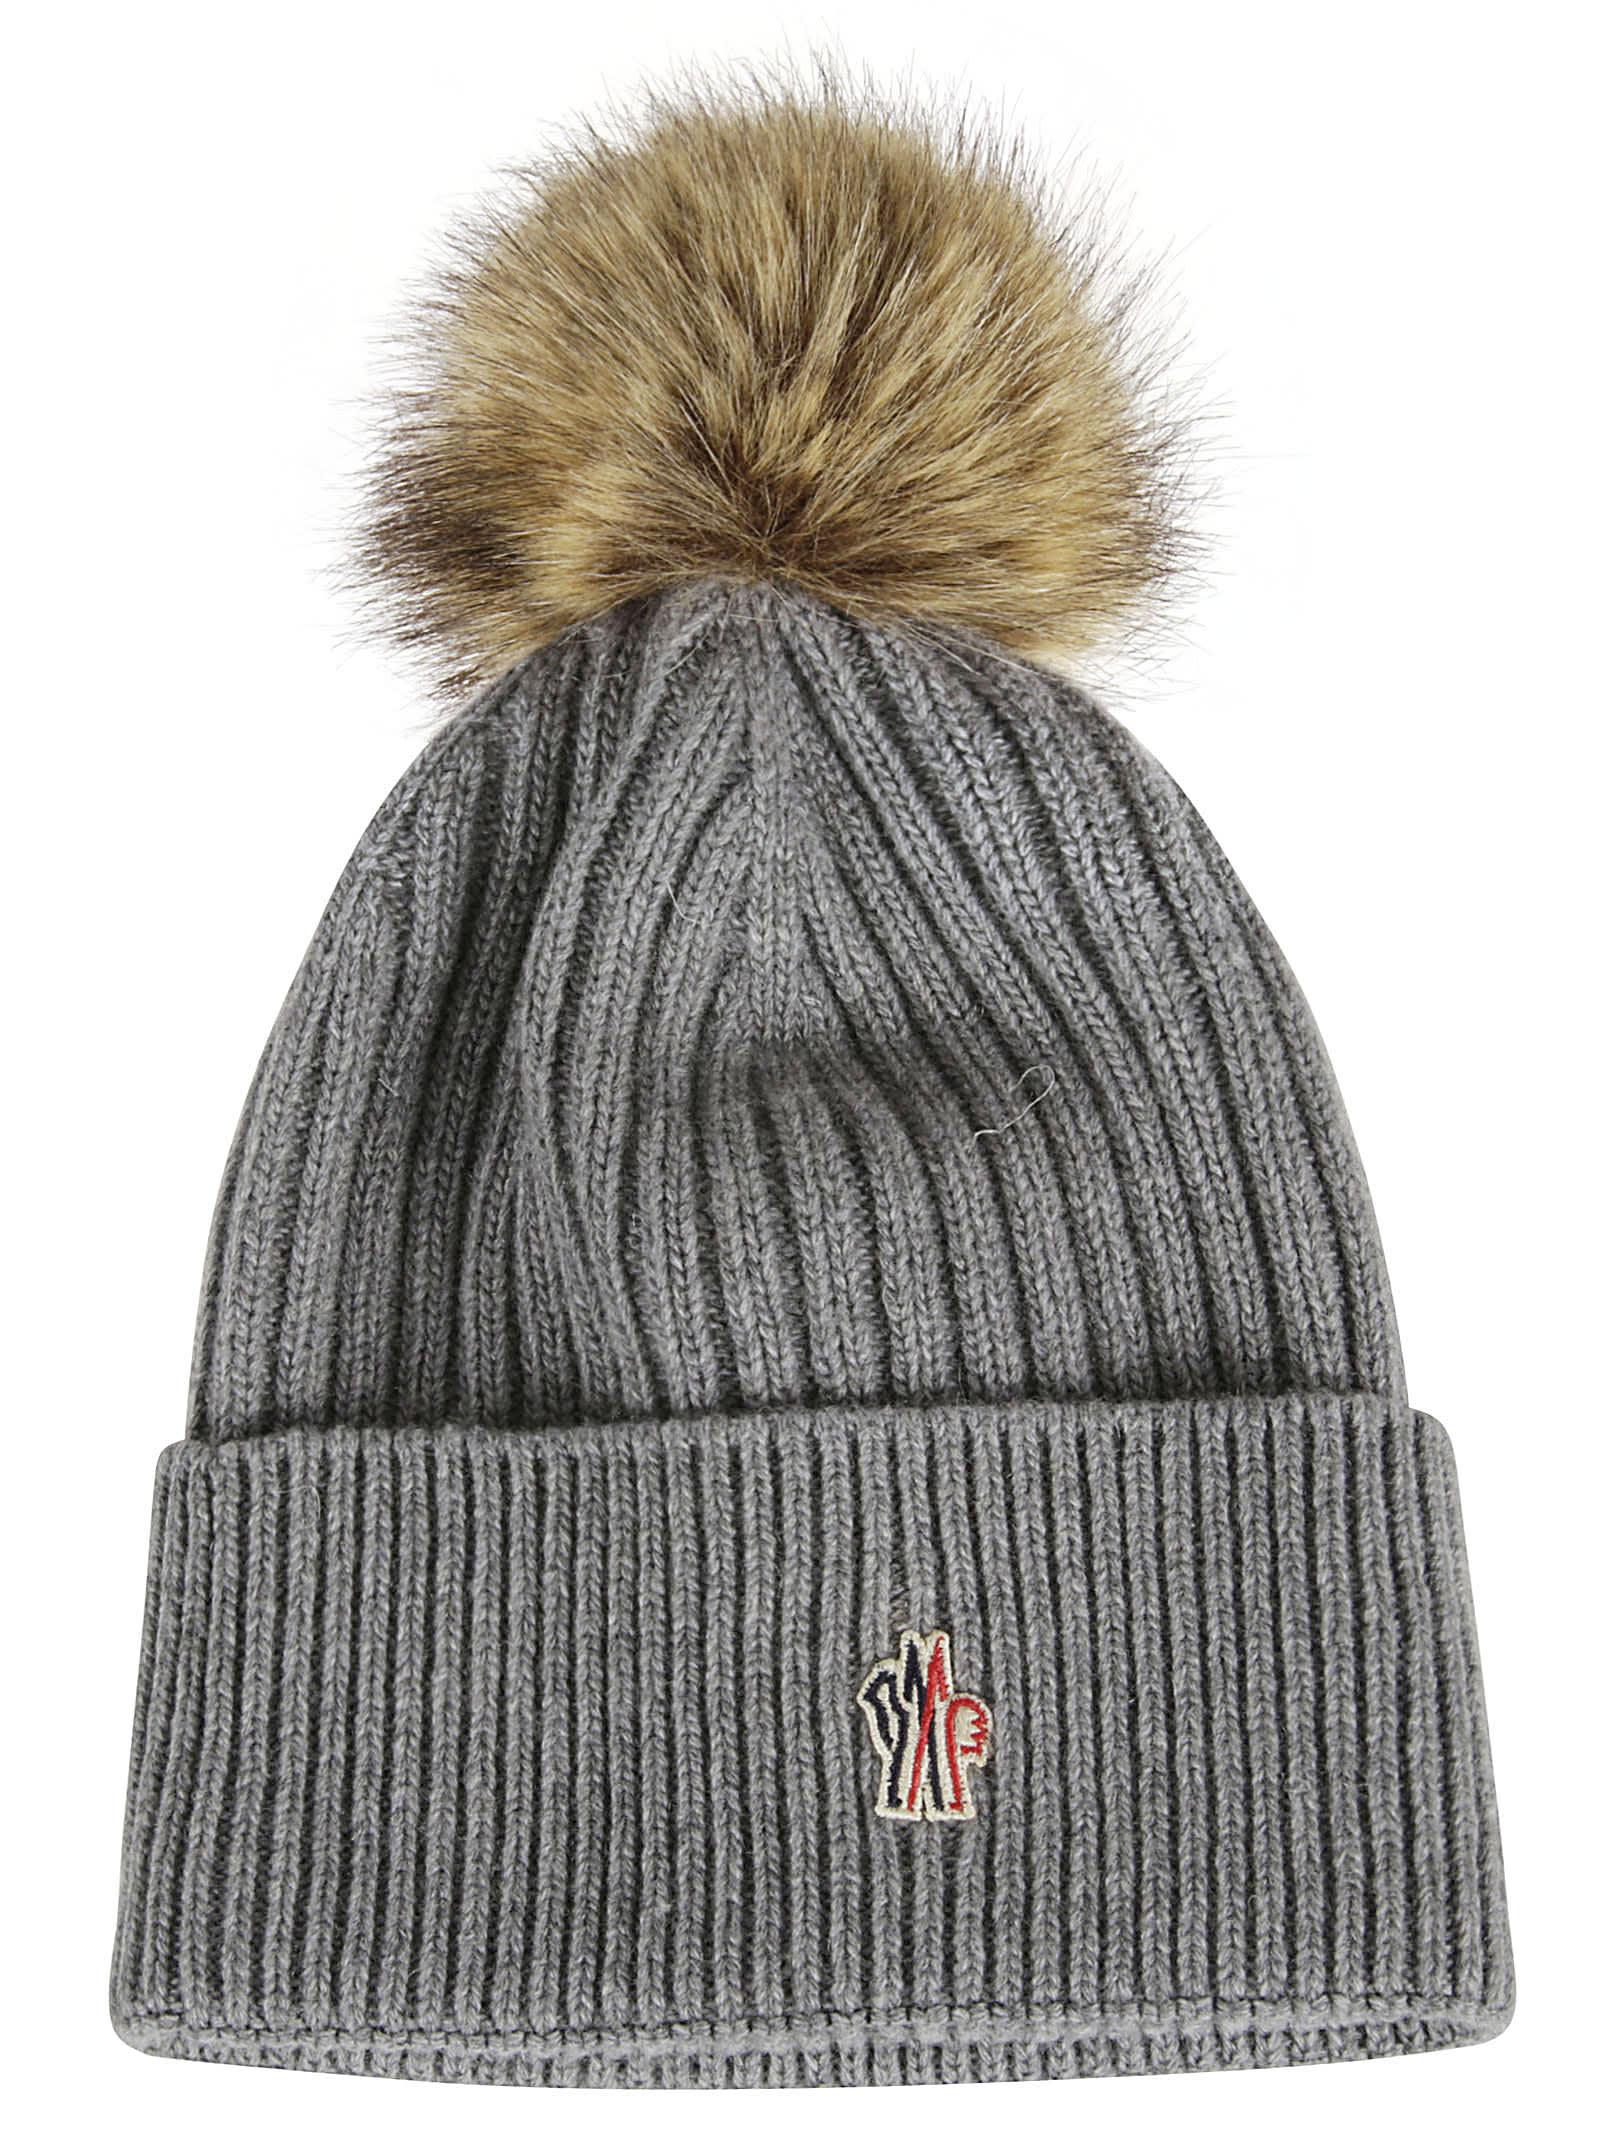 Moncler Grenoble Logo Embroidered Knit Beanie